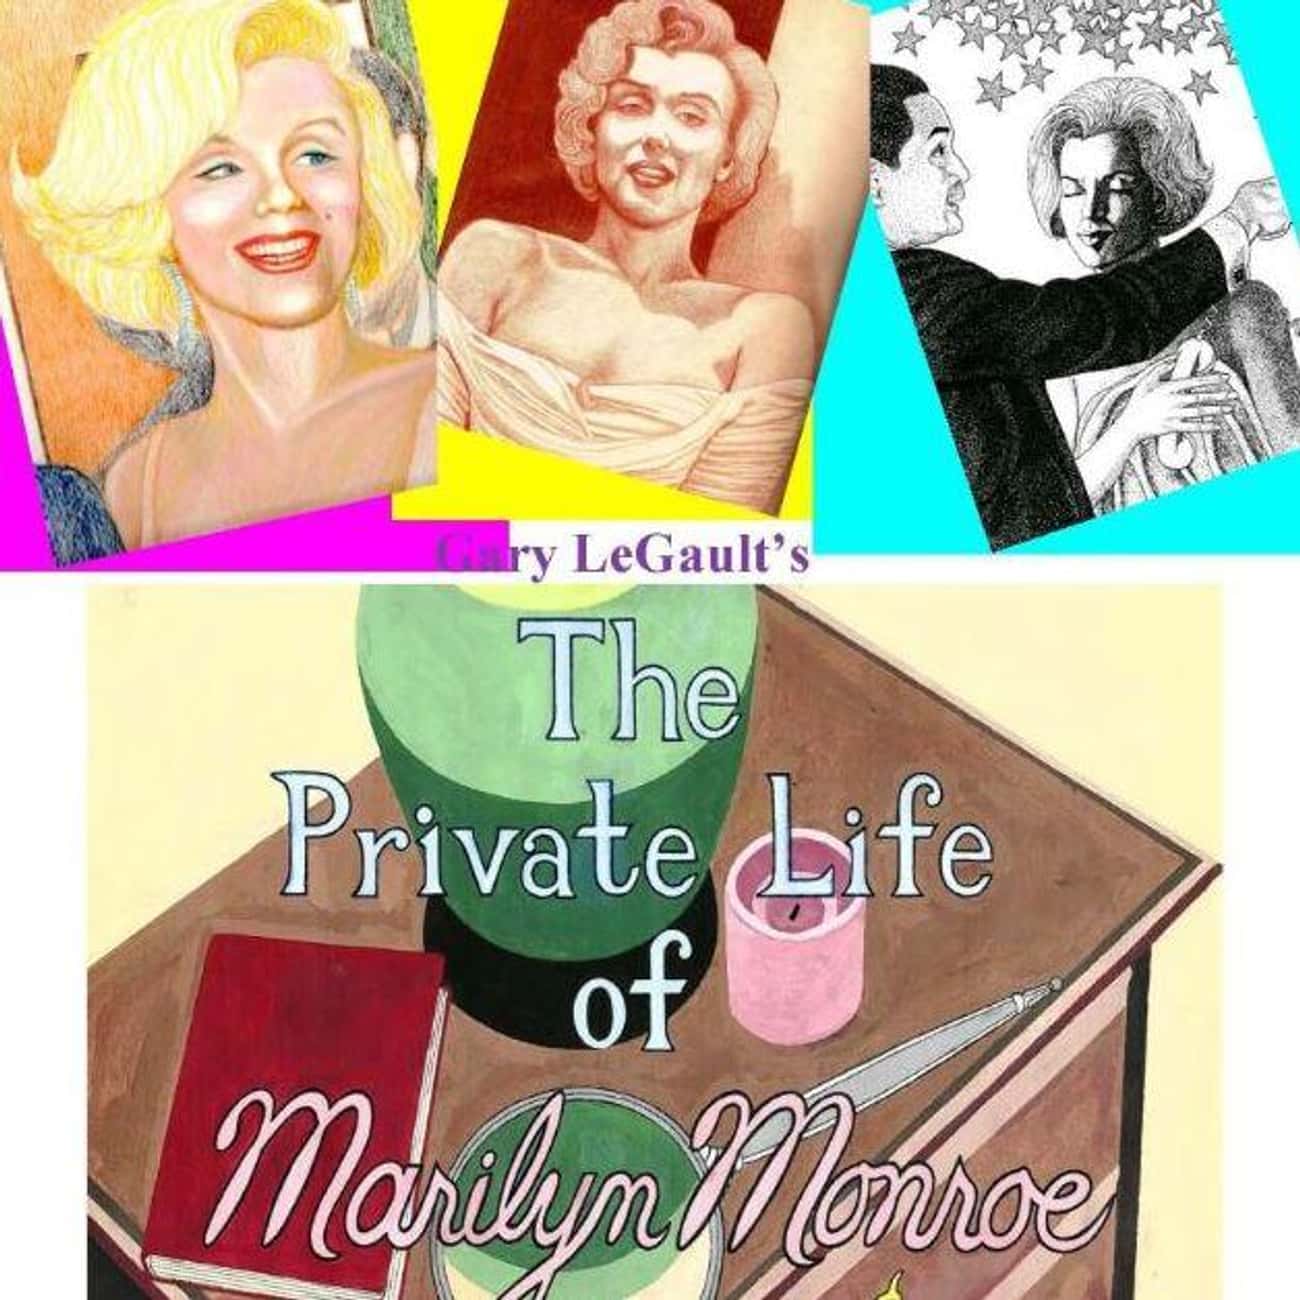 The Private Life of Marilyn Monroe